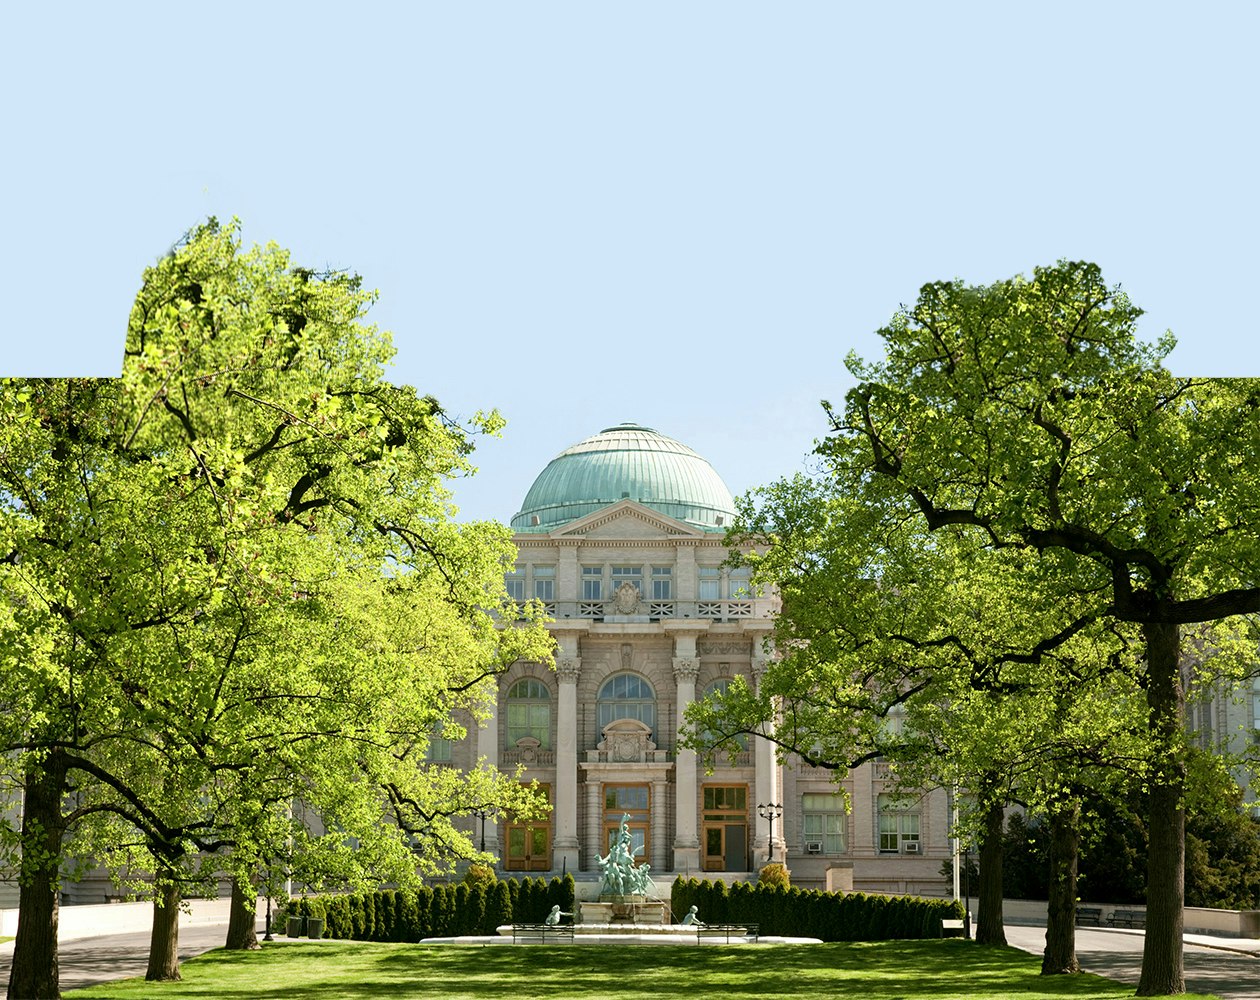 Lush green trees frame the pathway leading to an elegant building with a grand dome and a central fountain, showcasing classical architecture on a clear day.